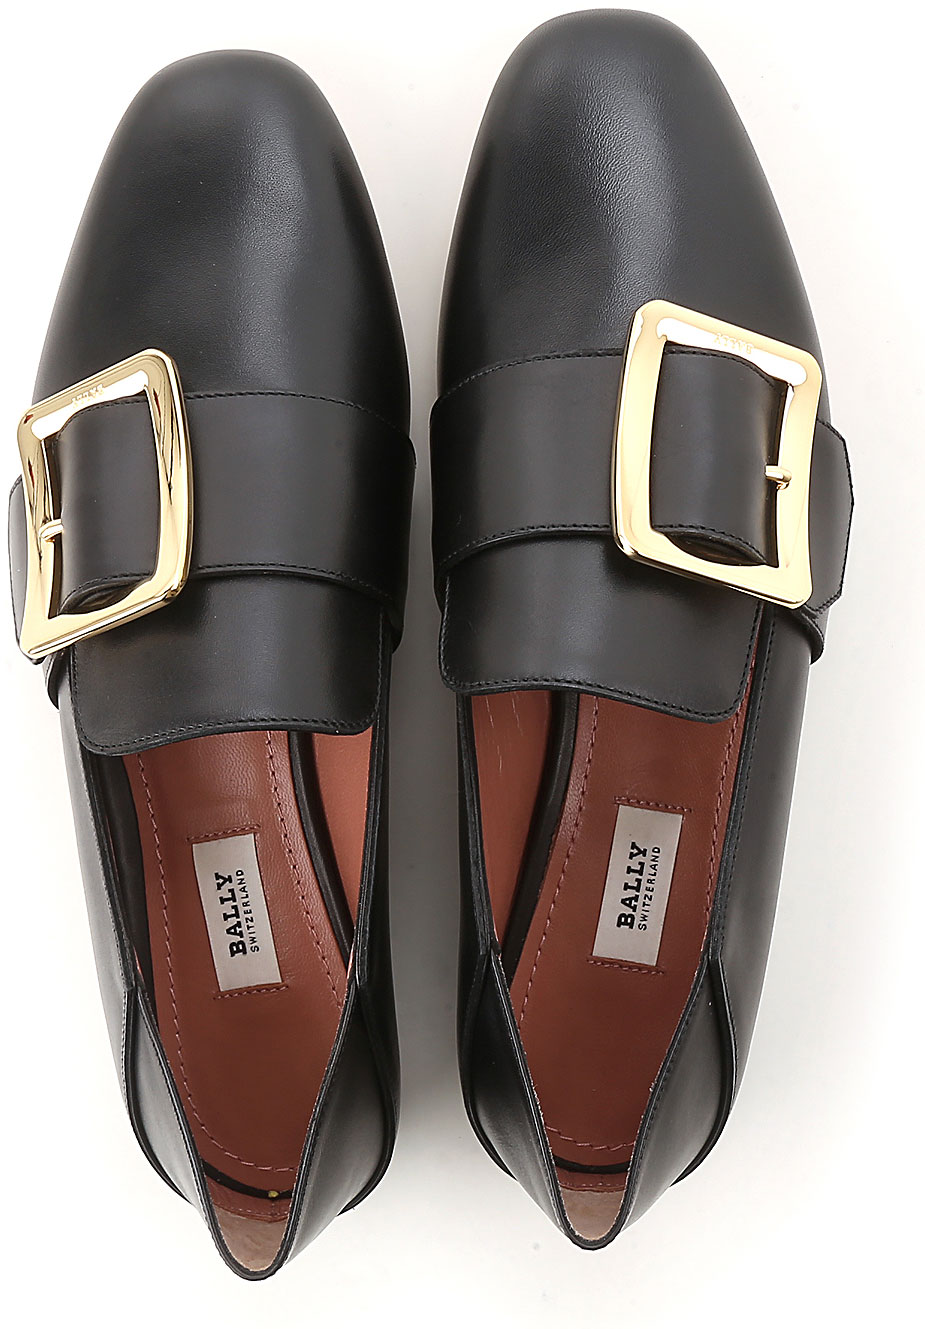 Womens Shoes Bally, Style code: janelle-100-6213099